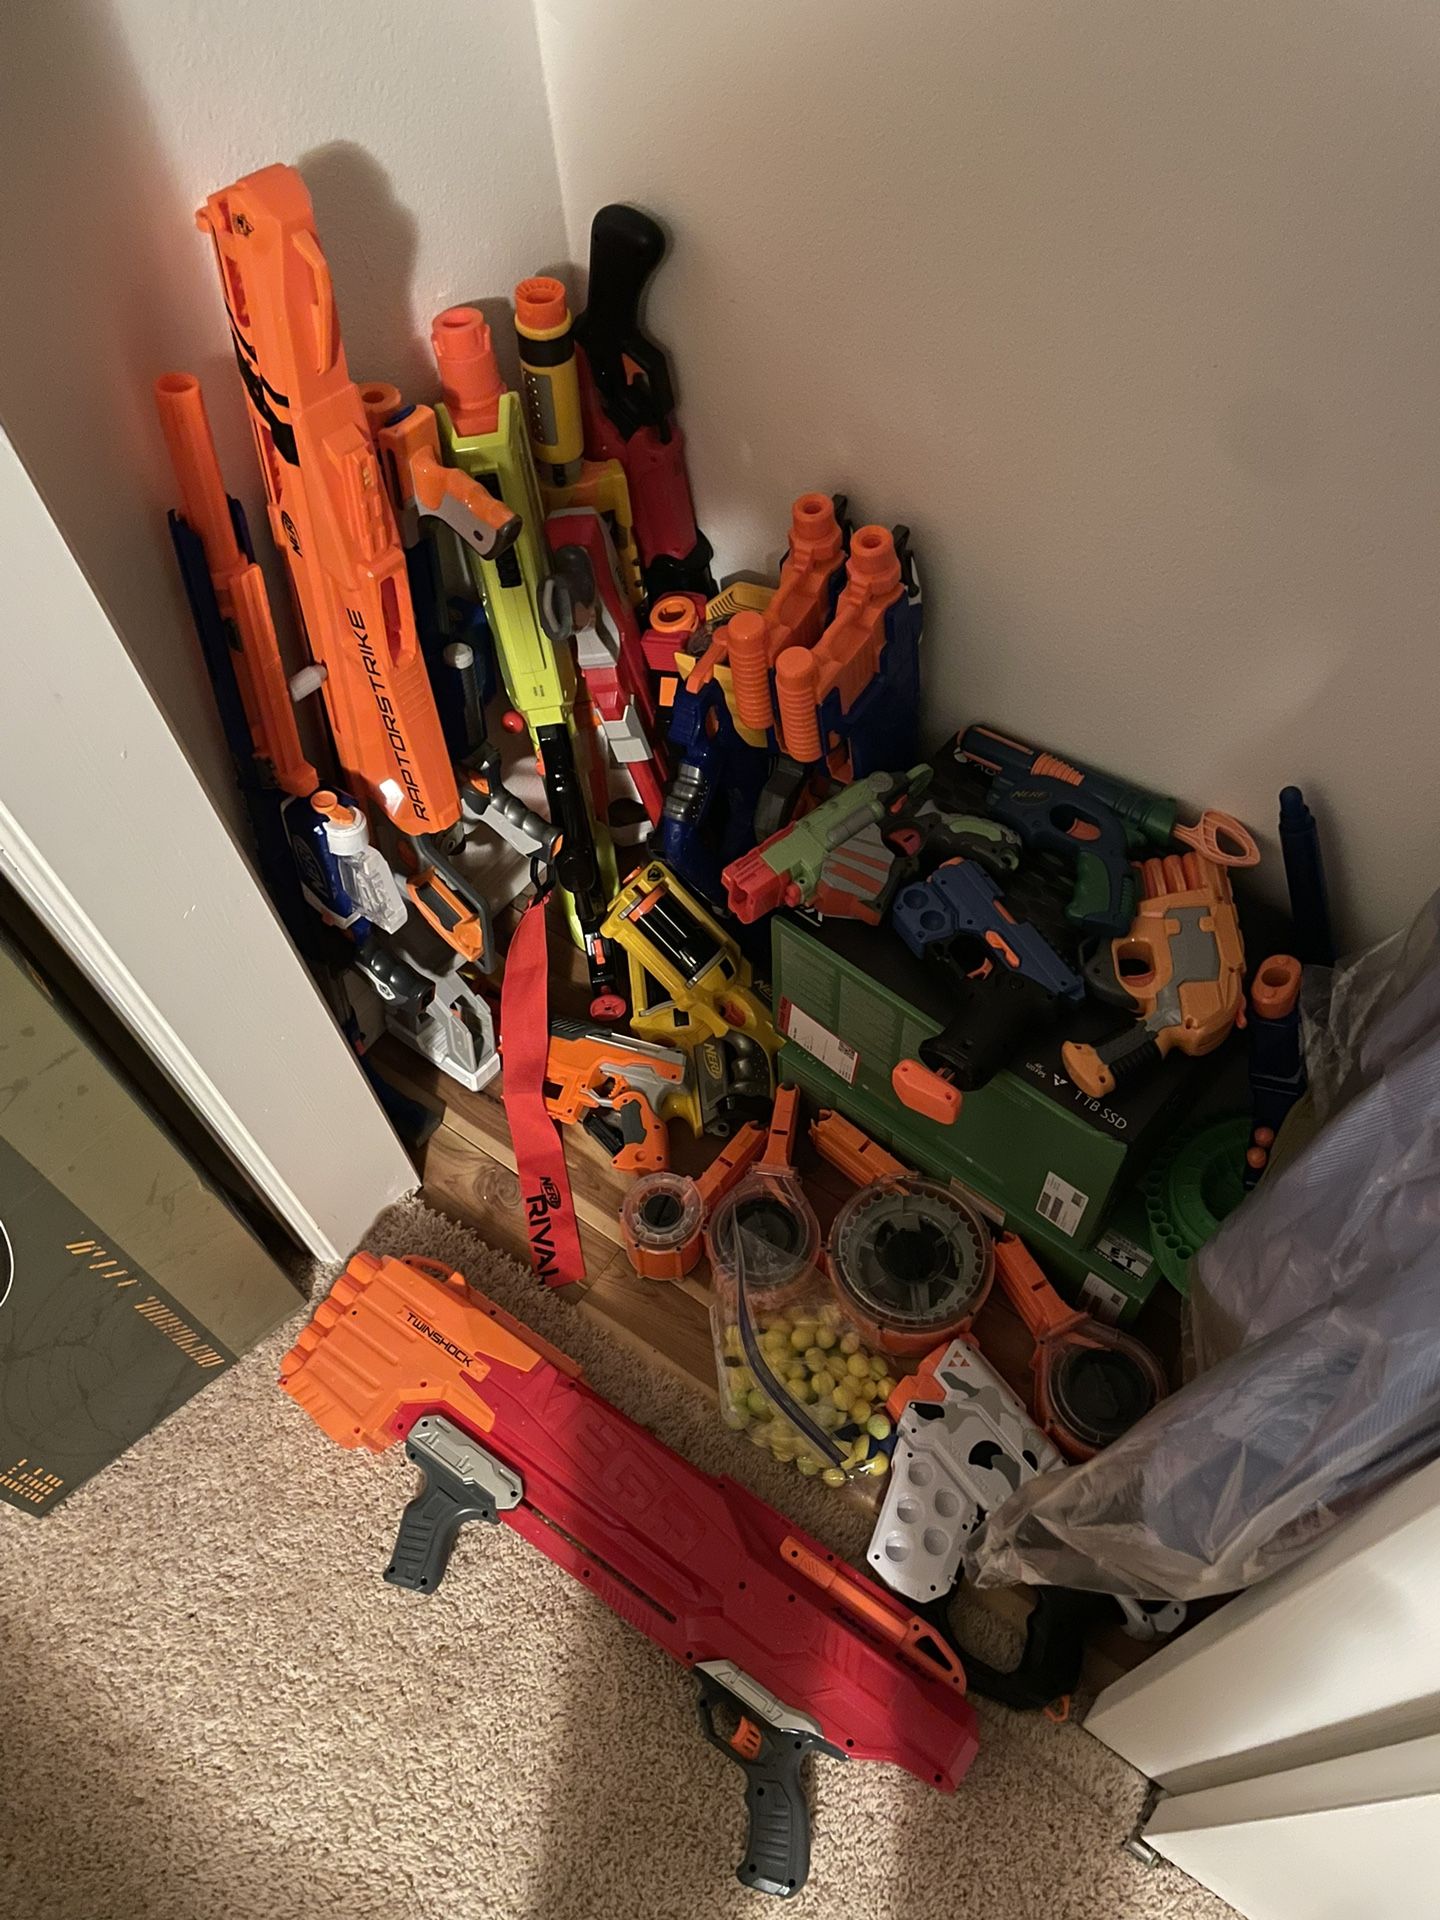 (READ DESCRIPTION) Nerf guns For Sale, Very Cheap, Give Me Your Best Offer